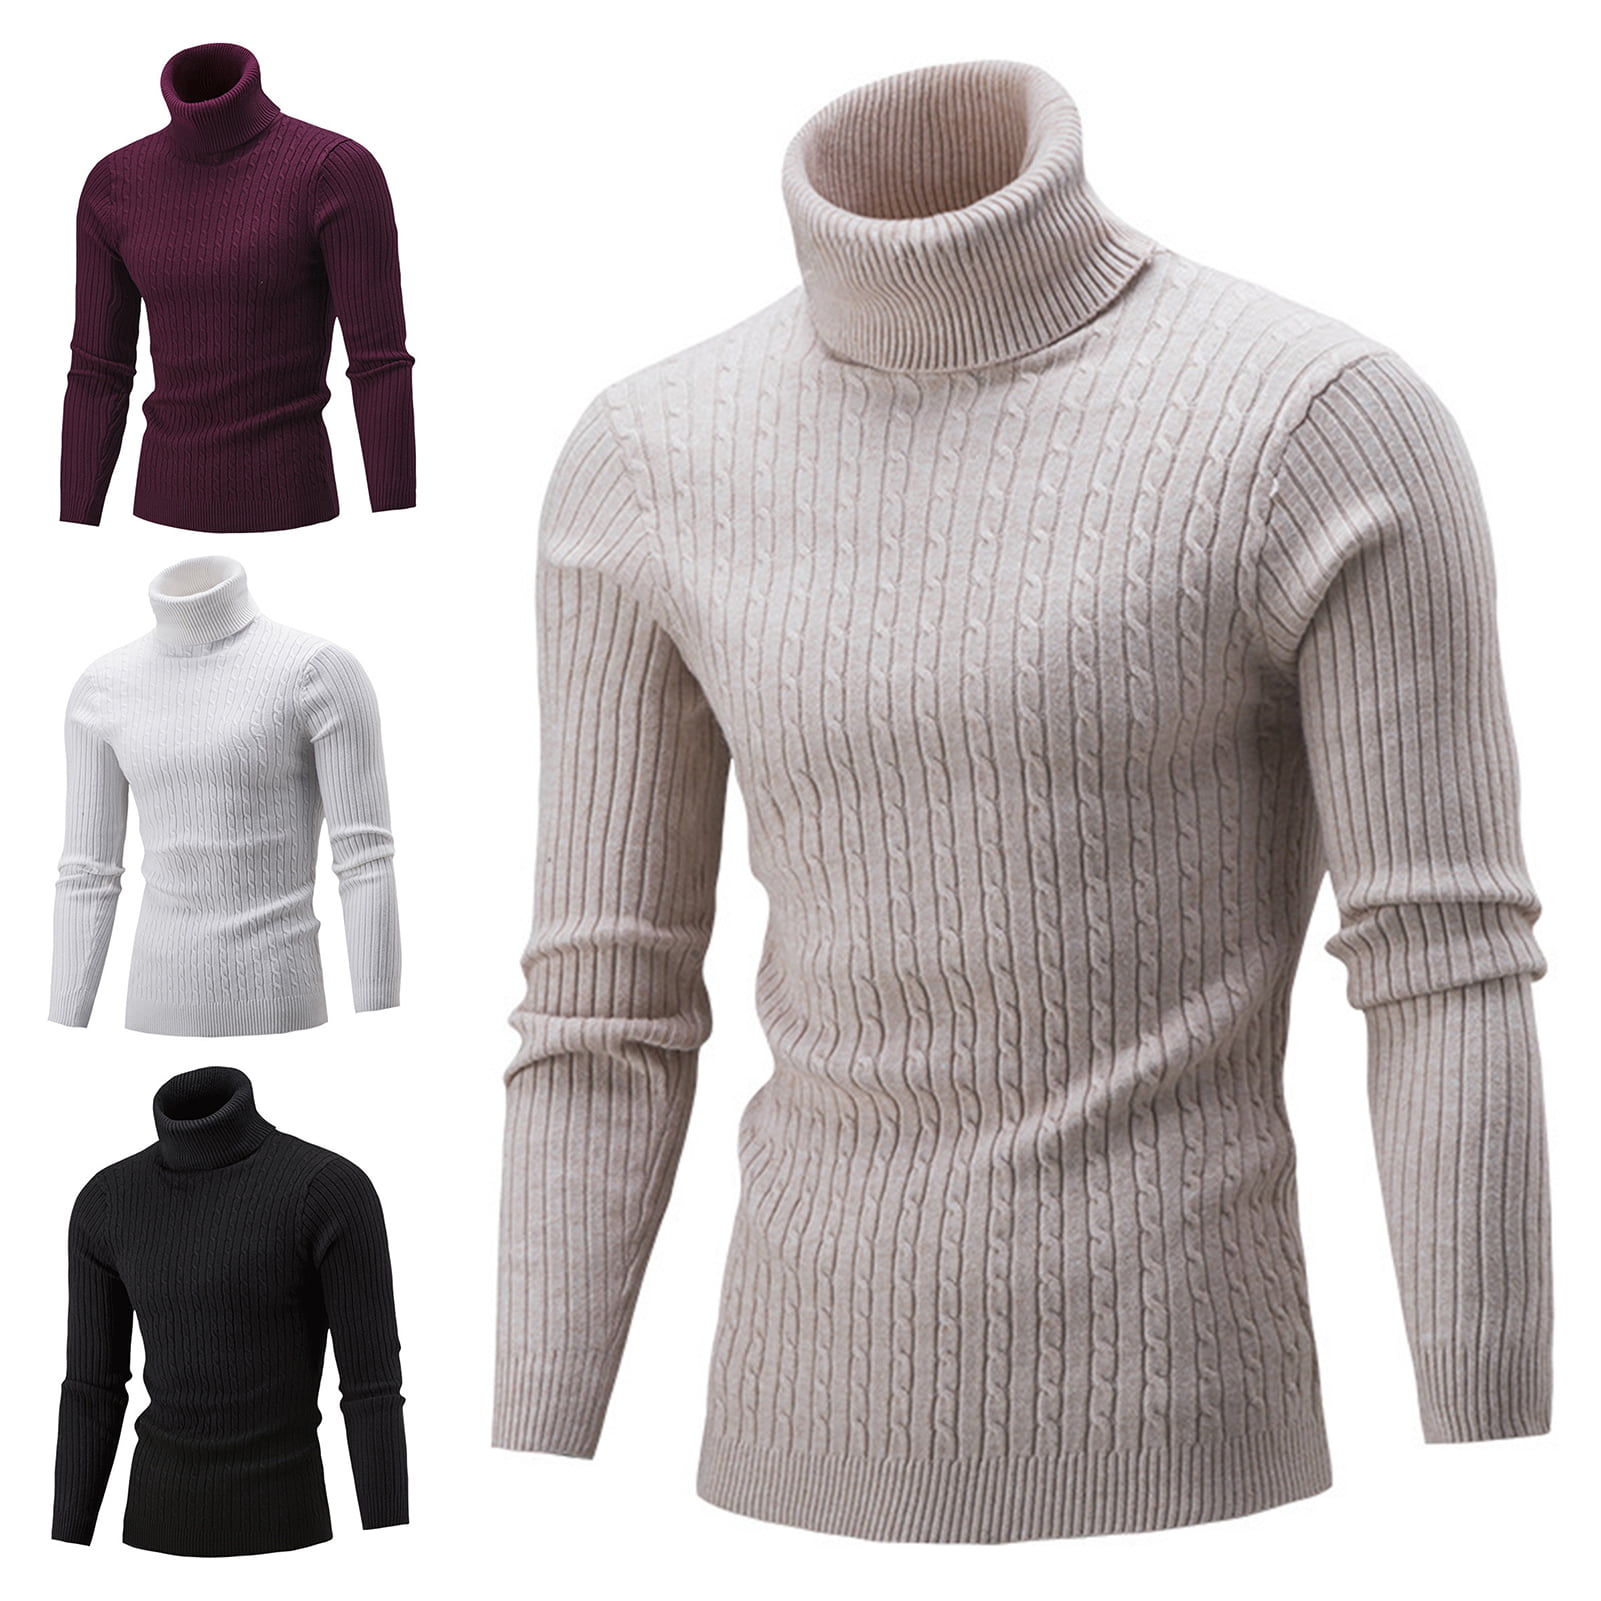 Howme Mens Knit Long-Sleeve Mock Neck Solid Color Pullovers Sweater